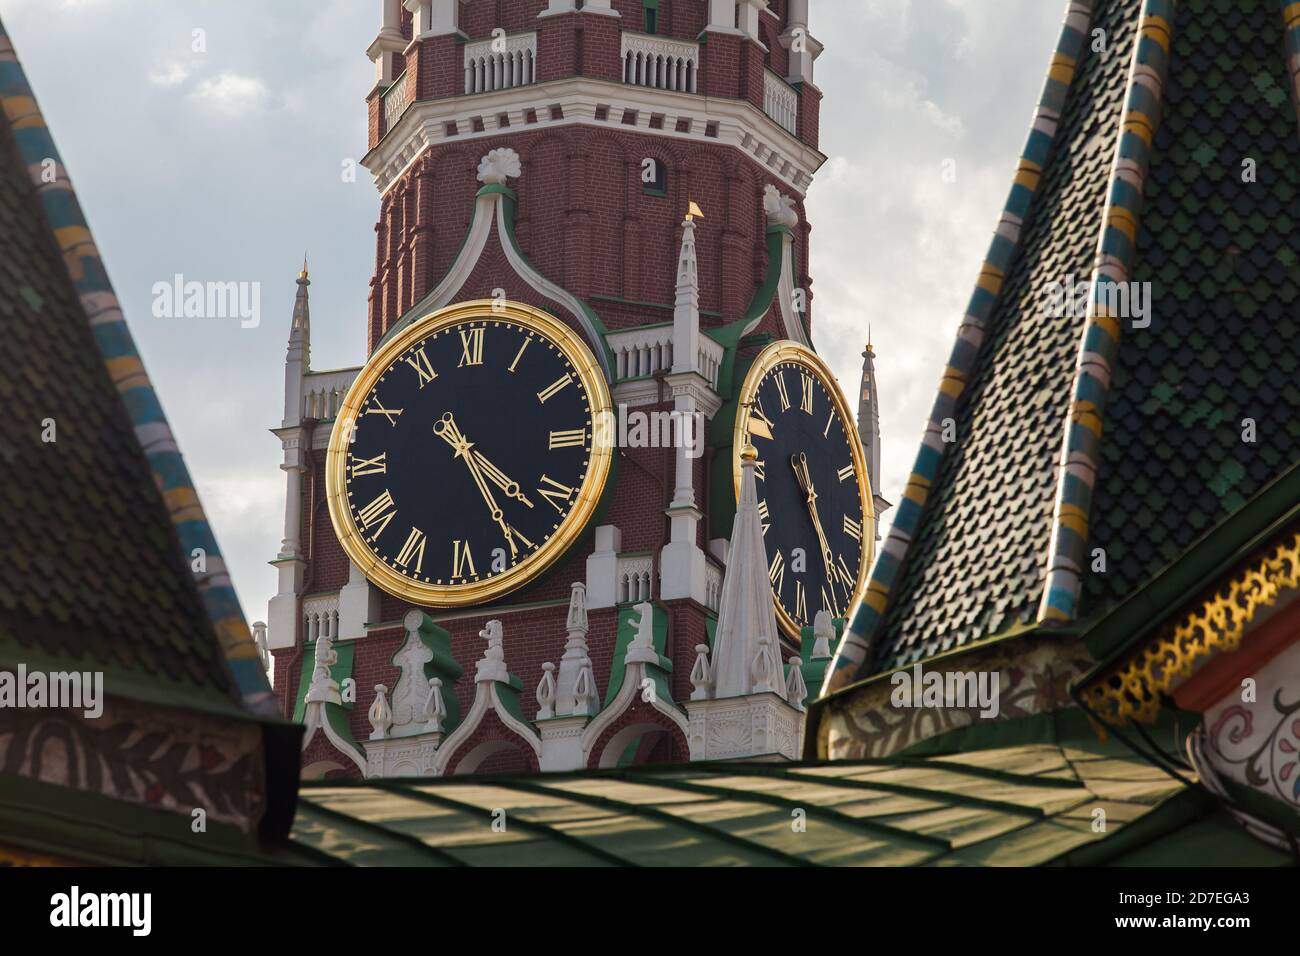 Kremlin Clock on the Spasskaya Tower of Kremlin palace against cloudy sky in Moscow,Russia Stock Photo